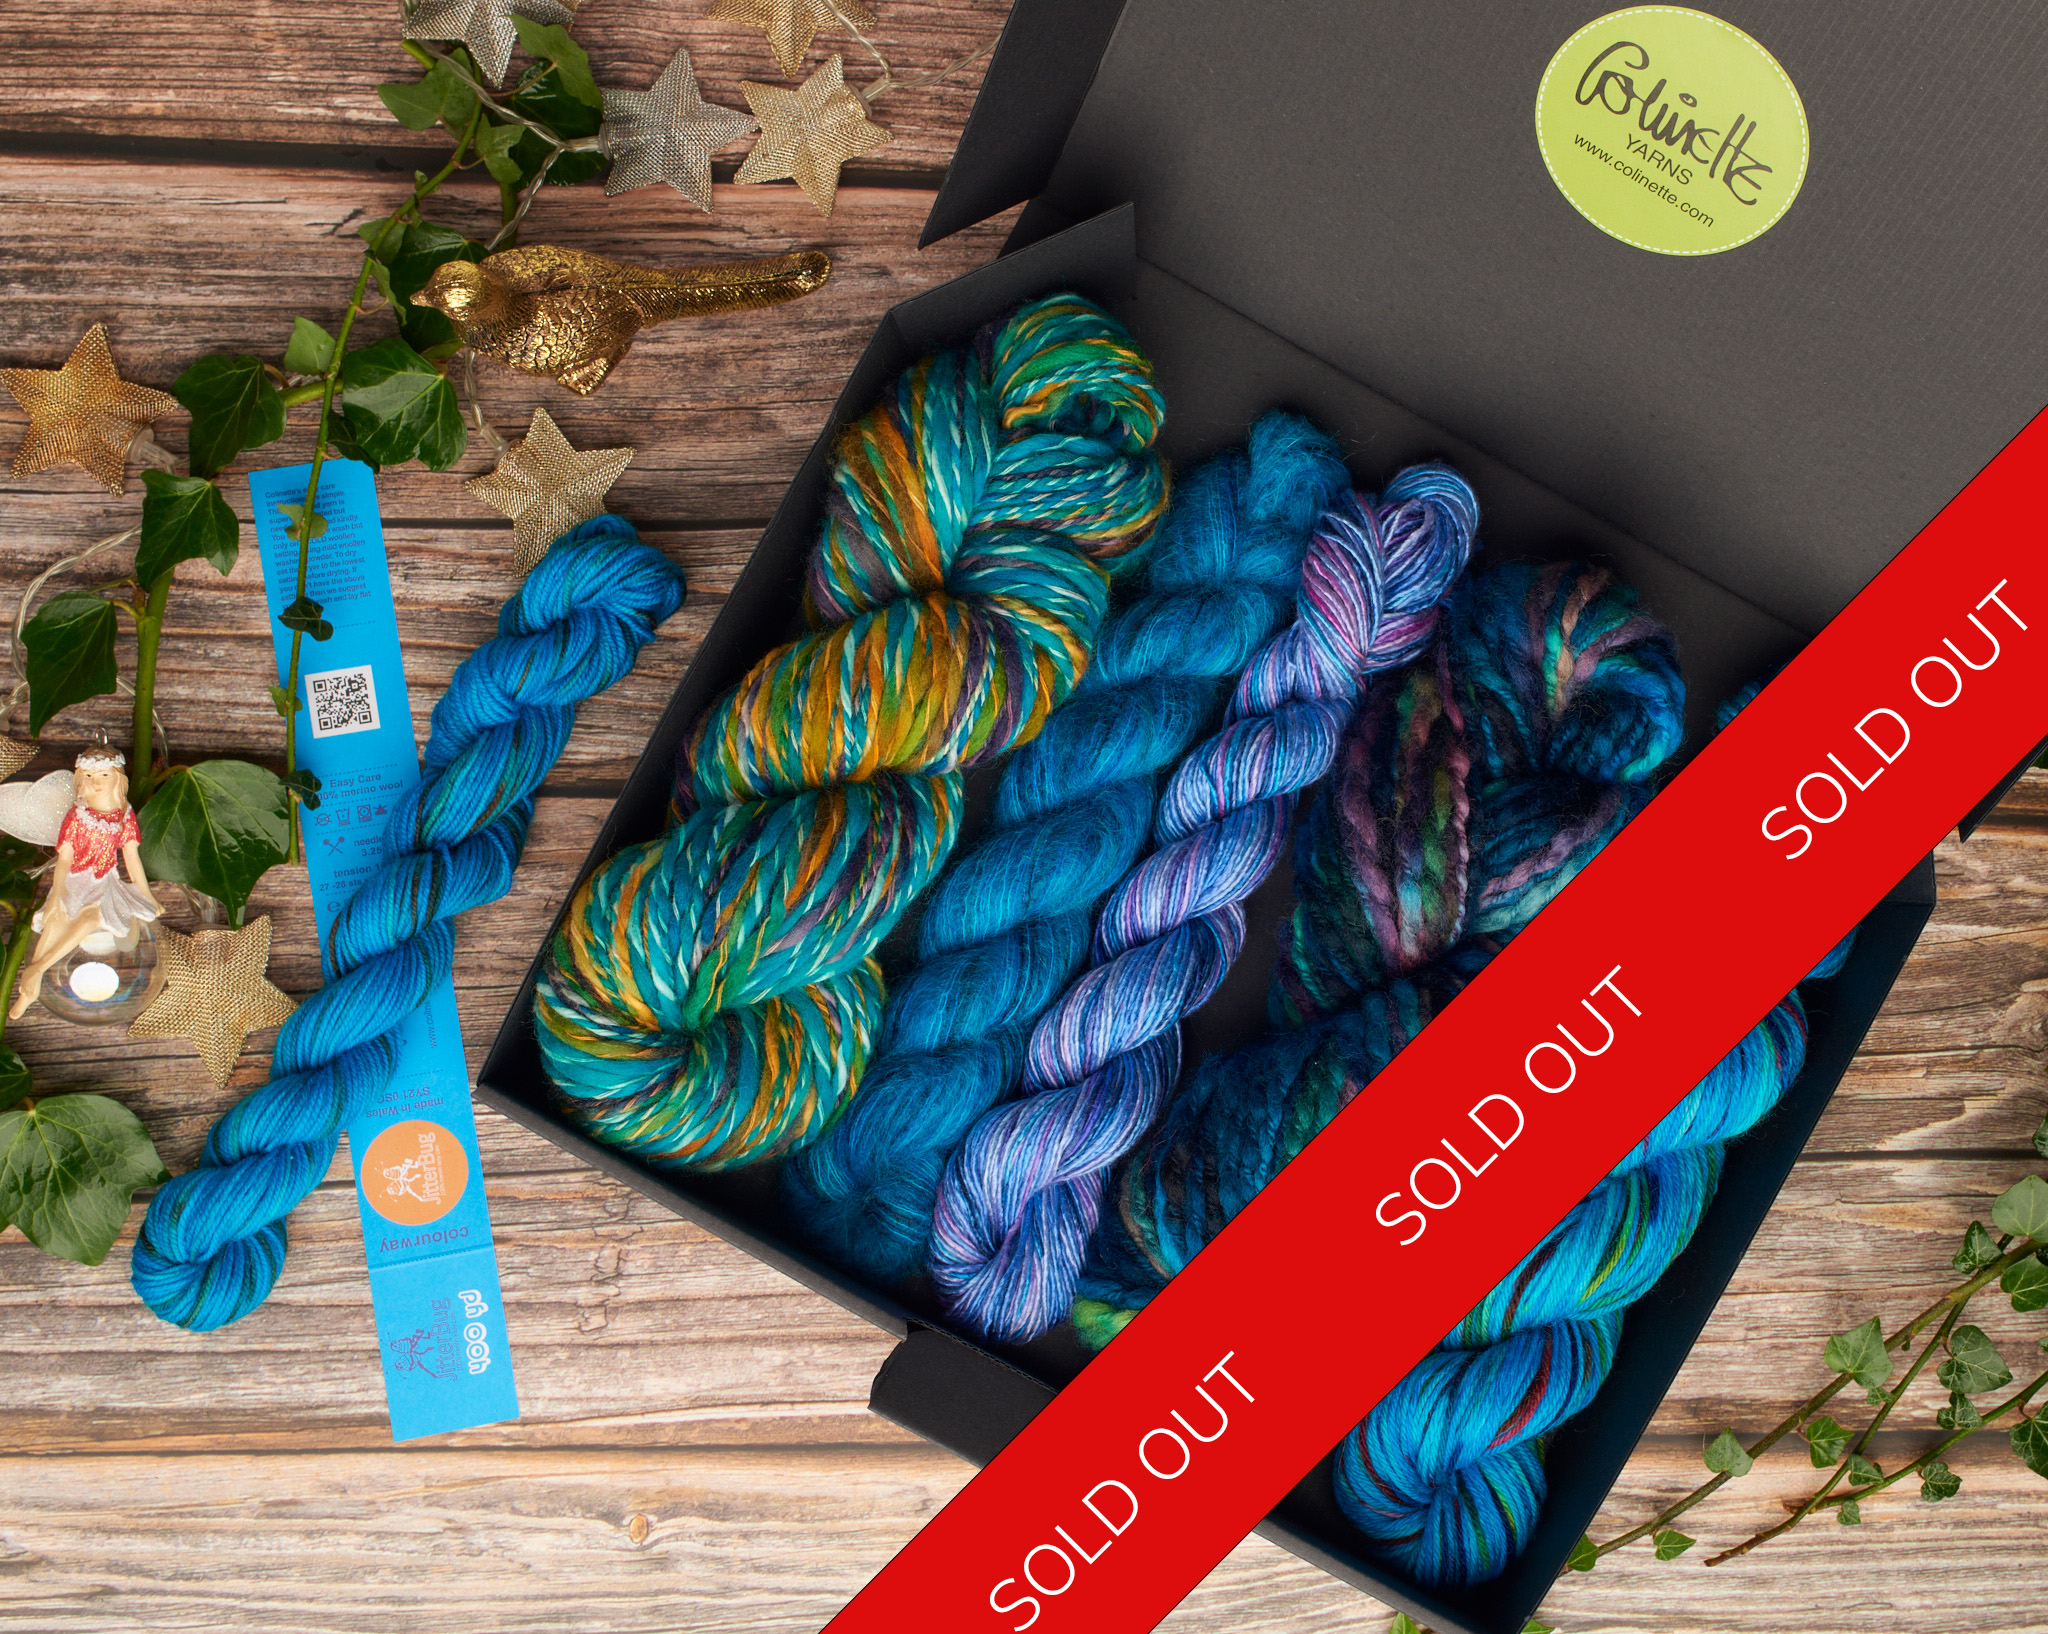 colinette yarns hand dyed yarn Christmas boxes shades Blues